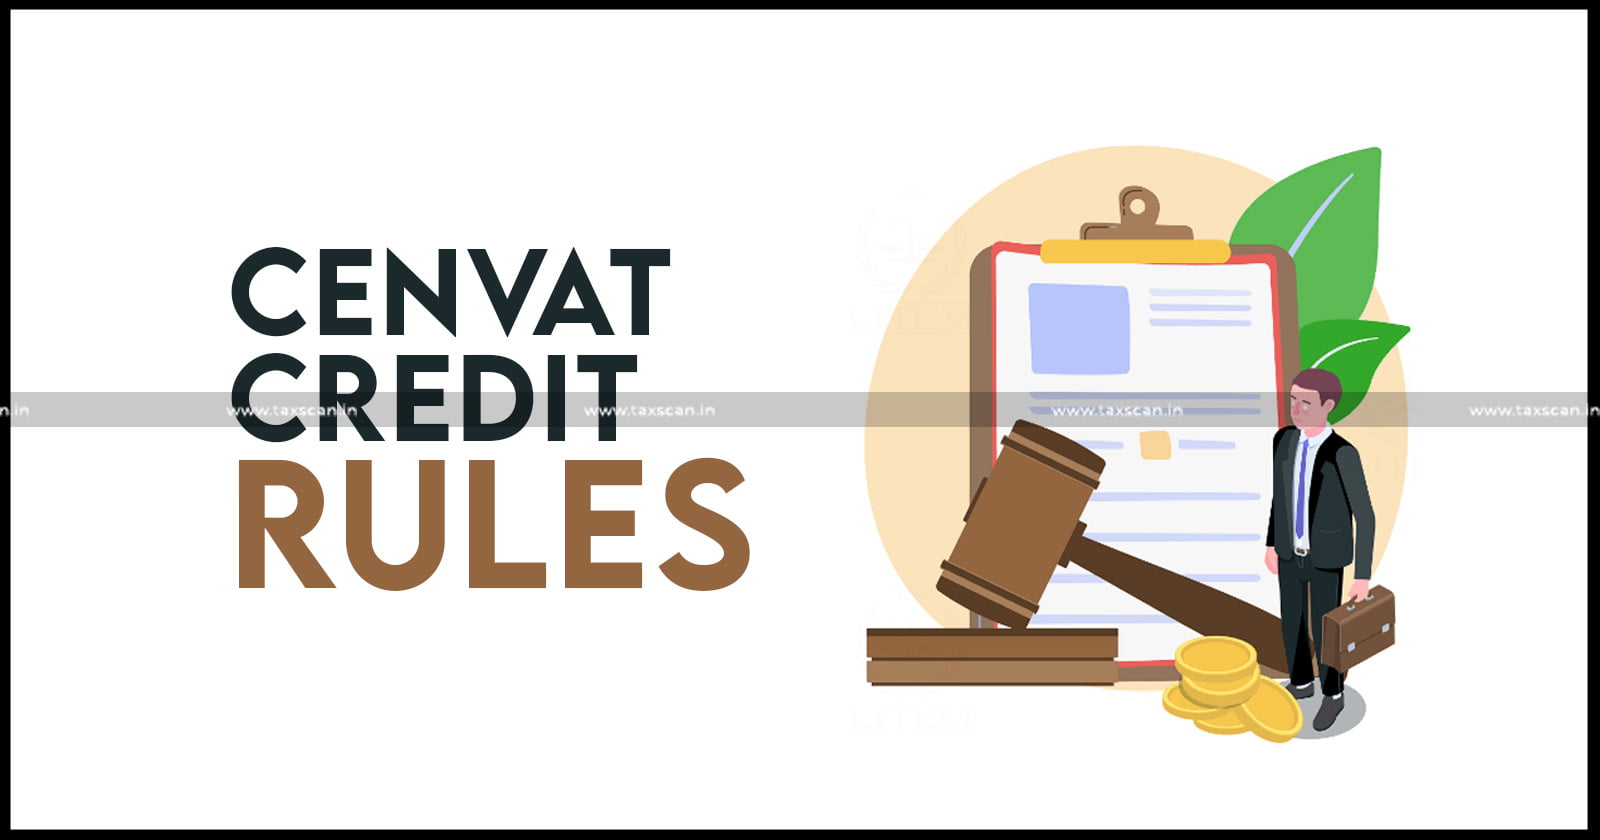 CENVAT credit - Excise Duty Allowable to Warranty - Customs Excise and Service Tax Appellate Tribunal - TAXSCAN